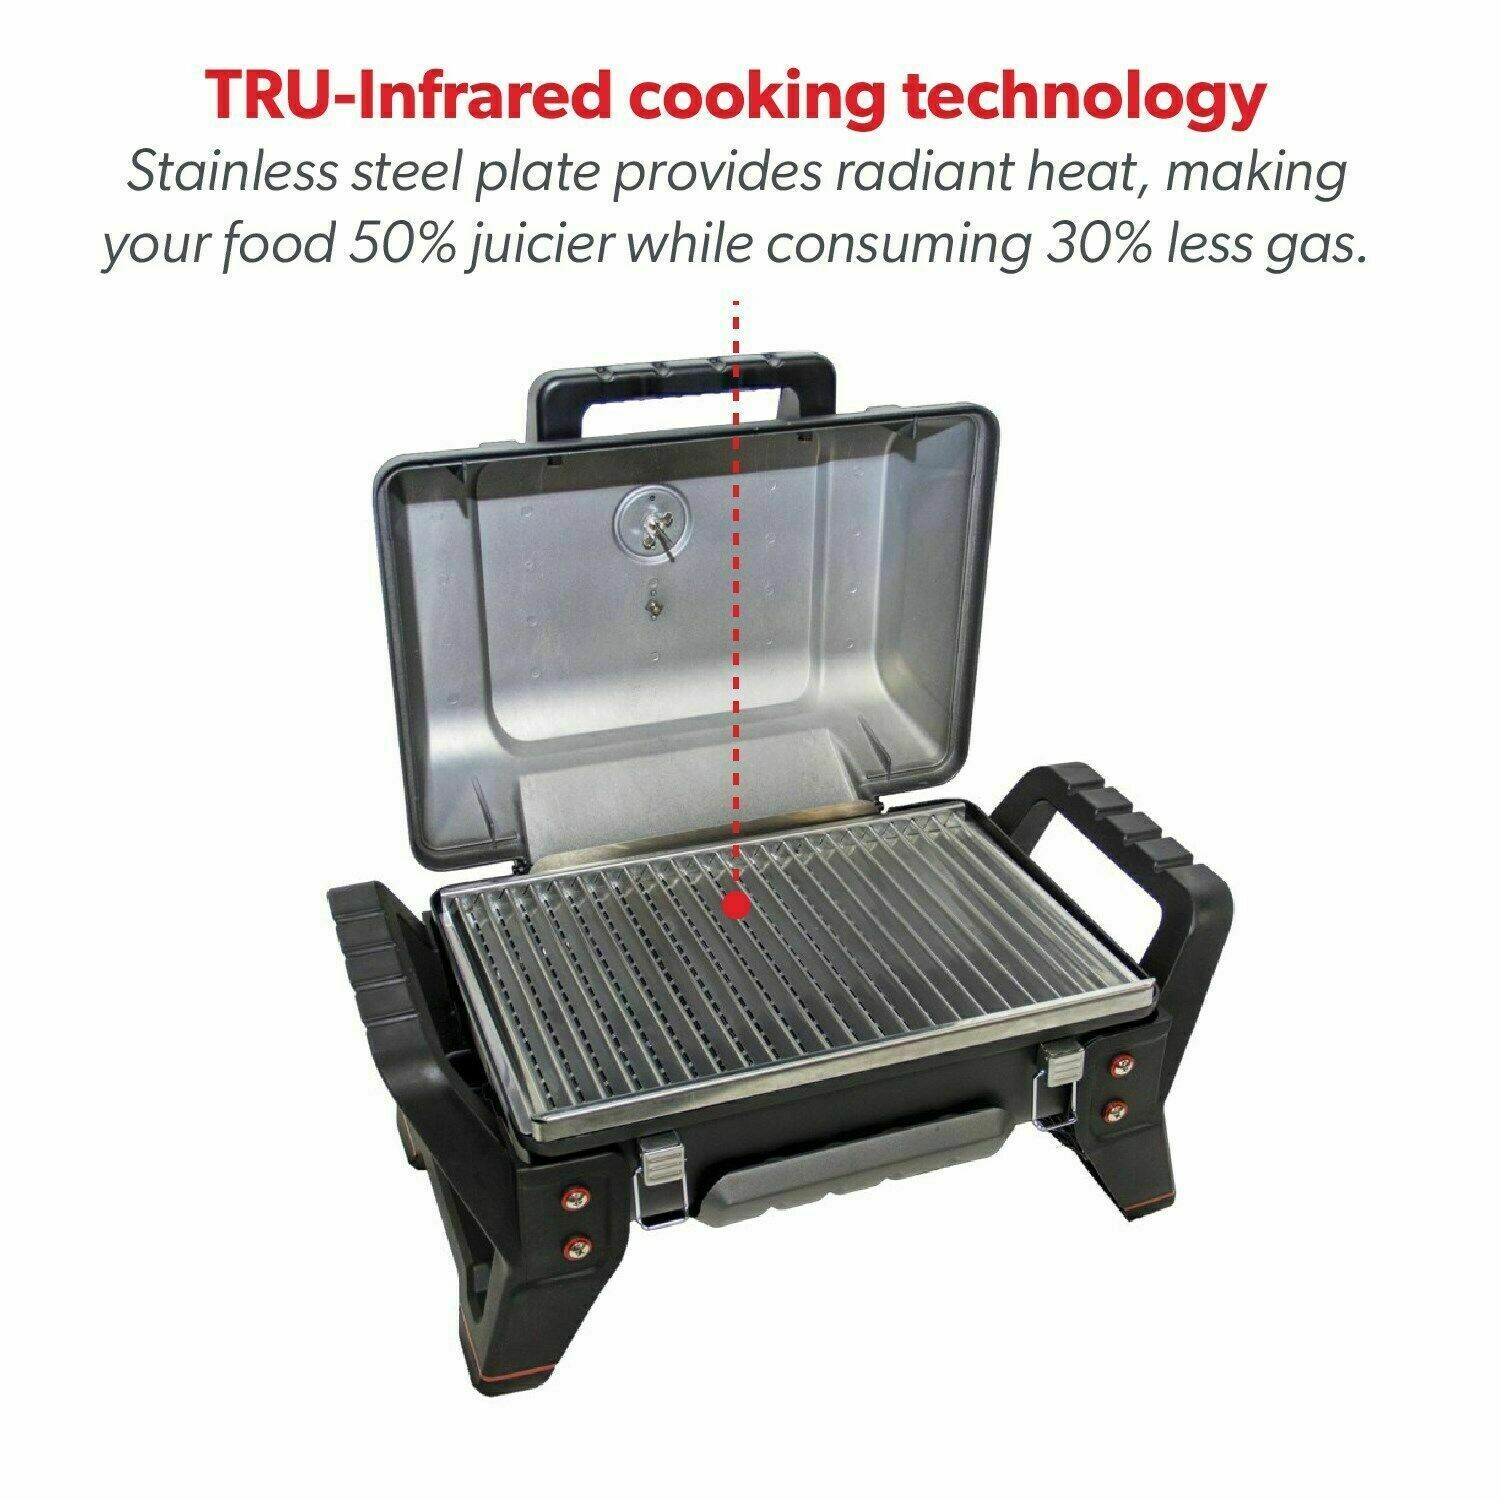 Char-Broil X200 Grill2Go Portable Gas Table Top BBQ Barbeque - Supply Outlet